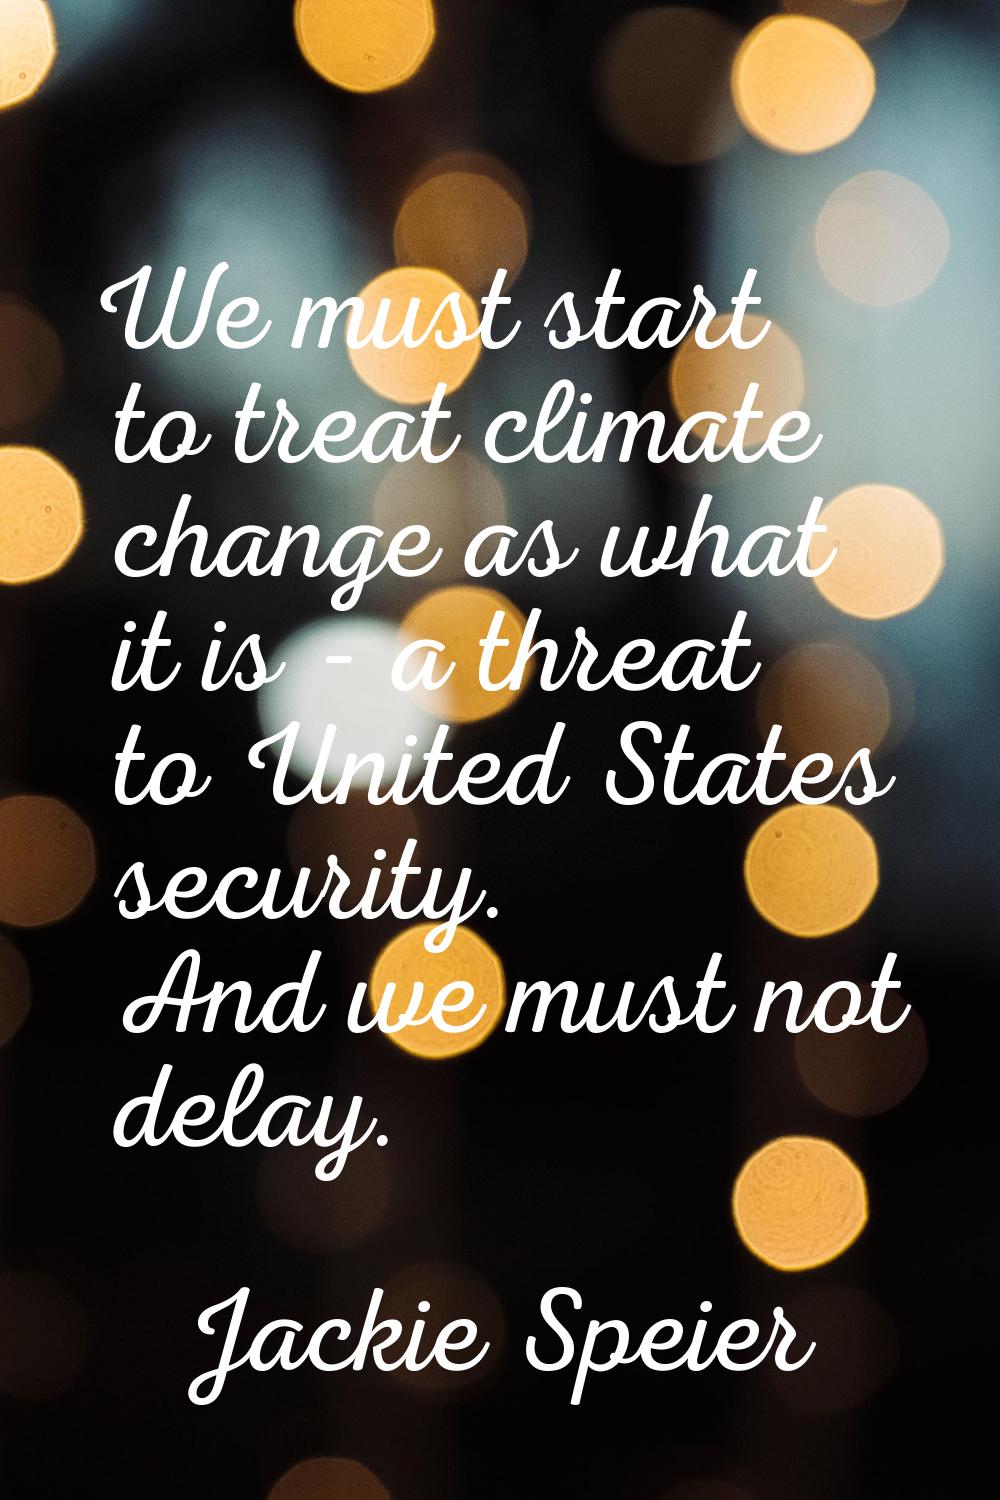 We must start to treat climate change as what it is - a threat to United States security. And we mu